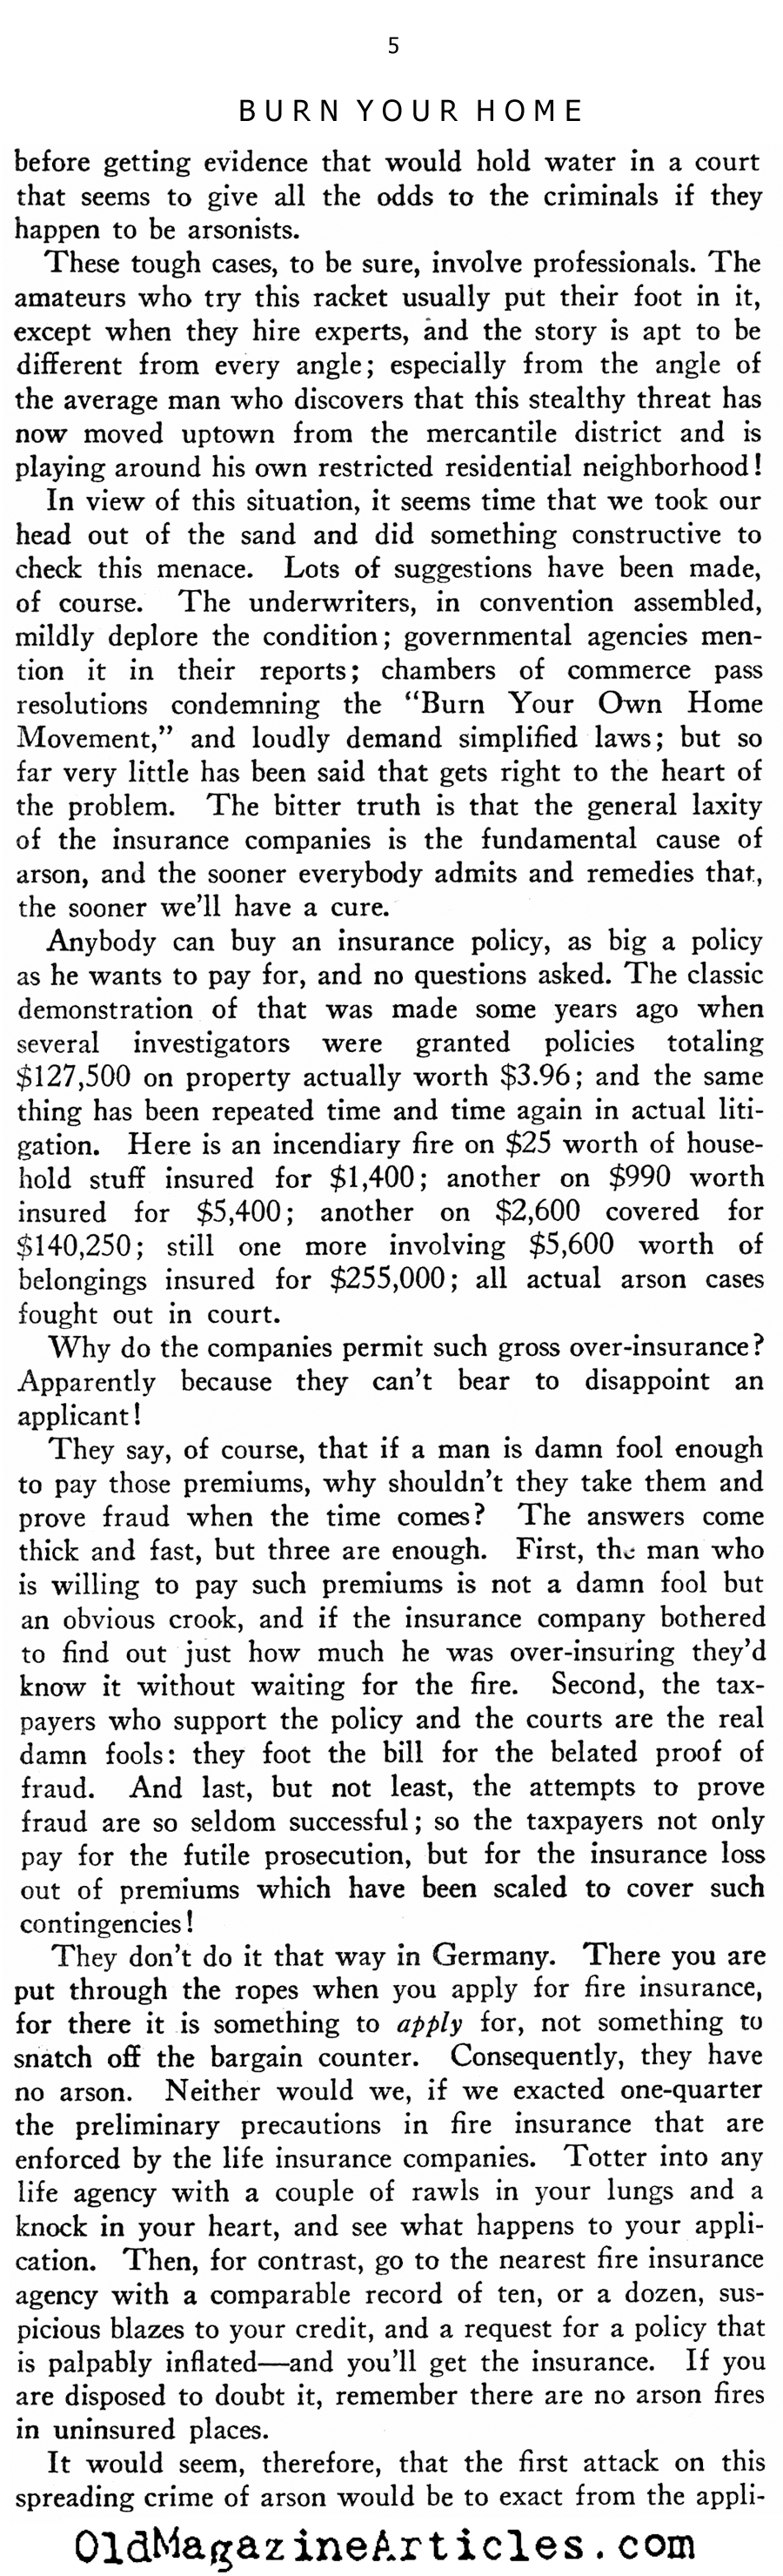 Arson on the Rise (New Outlook Magazine, 1933)